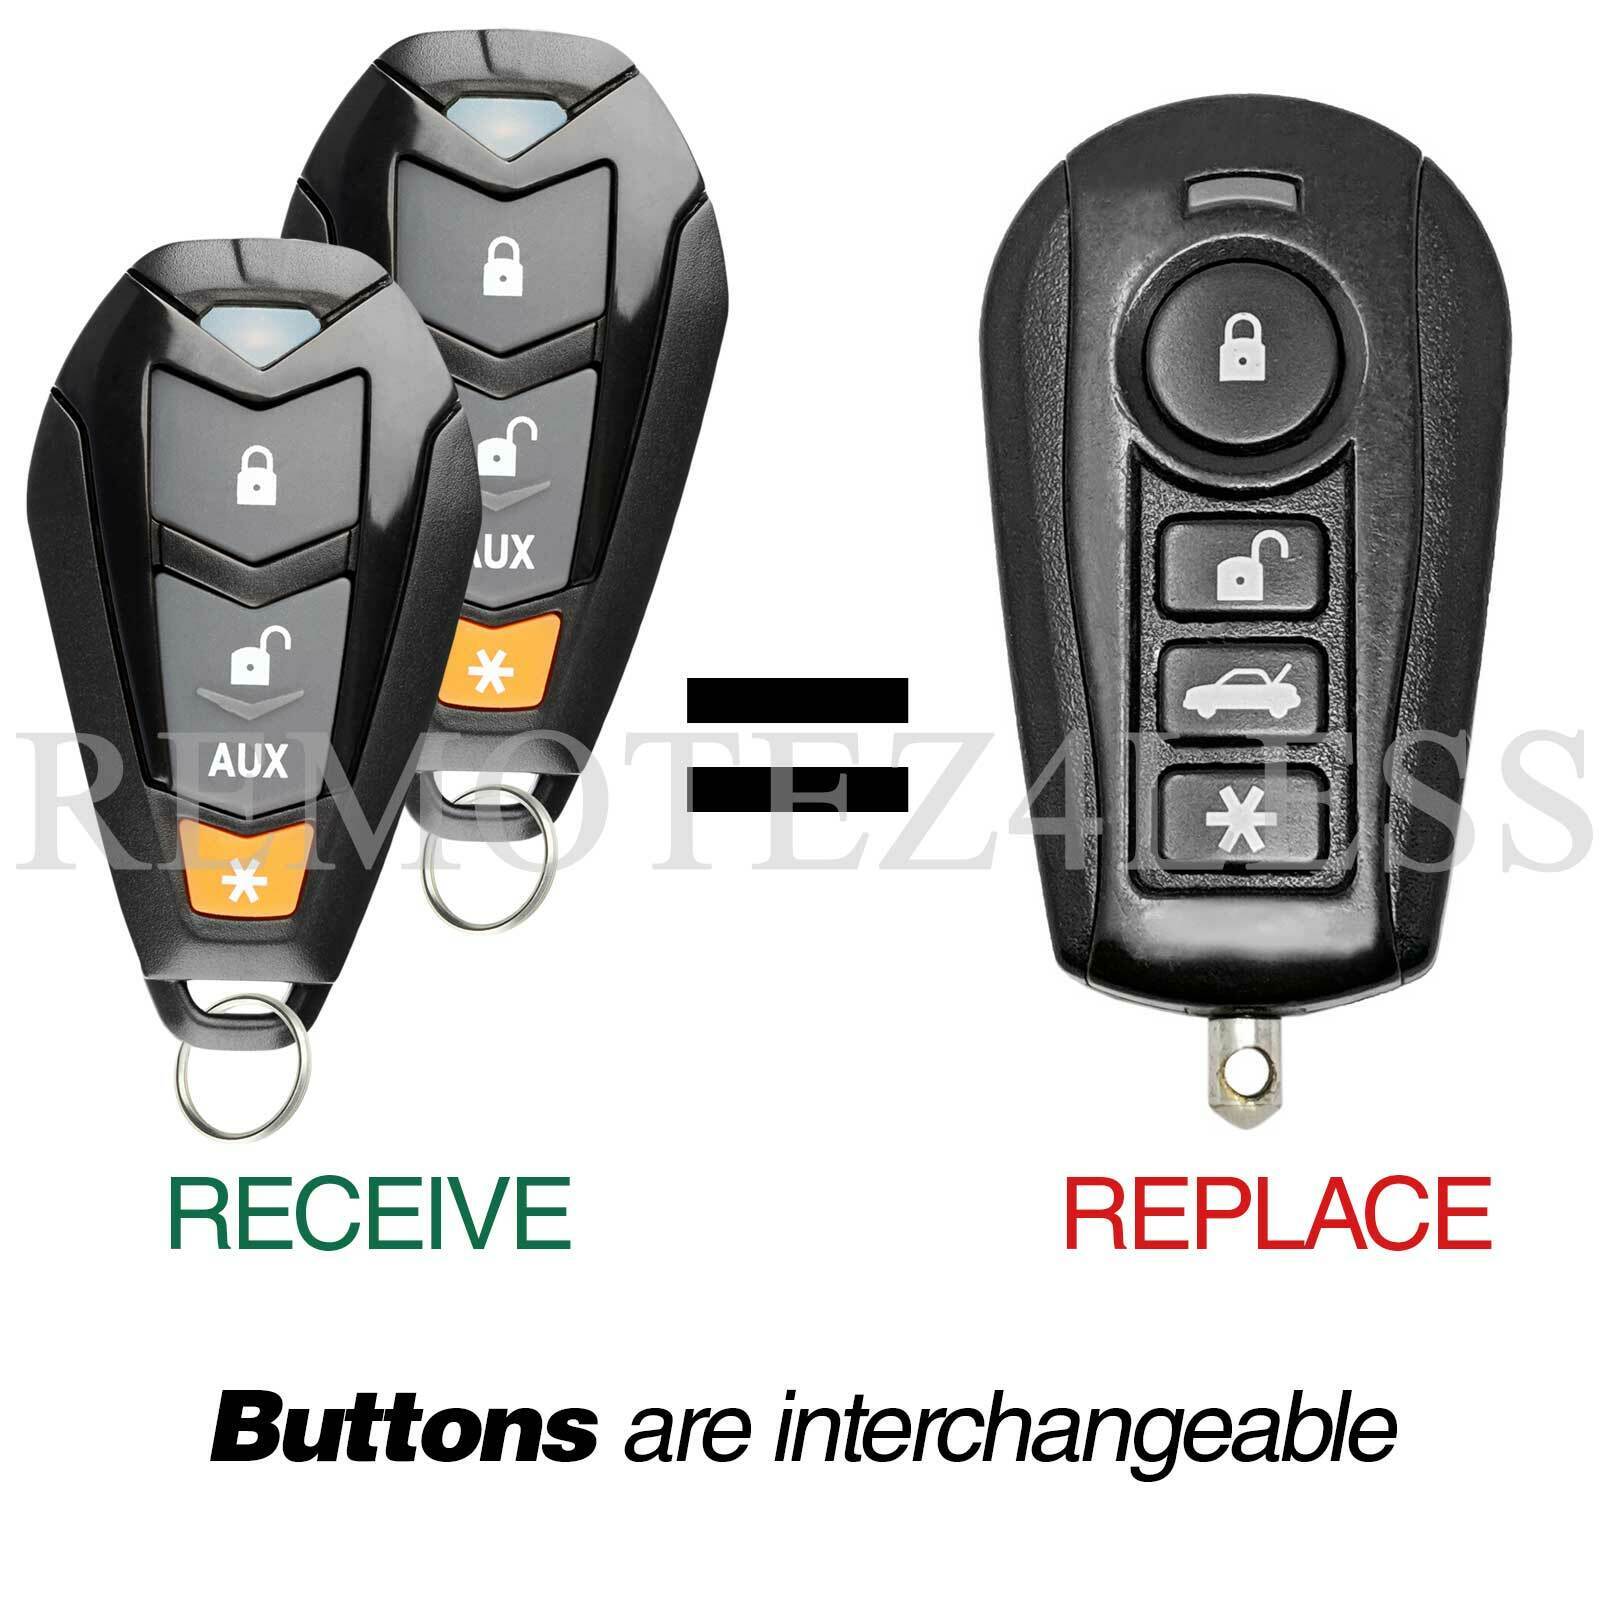 2 New Replacement Clifford 4 Button Keyless Remote Key Fob For EZSDEI7141 Black